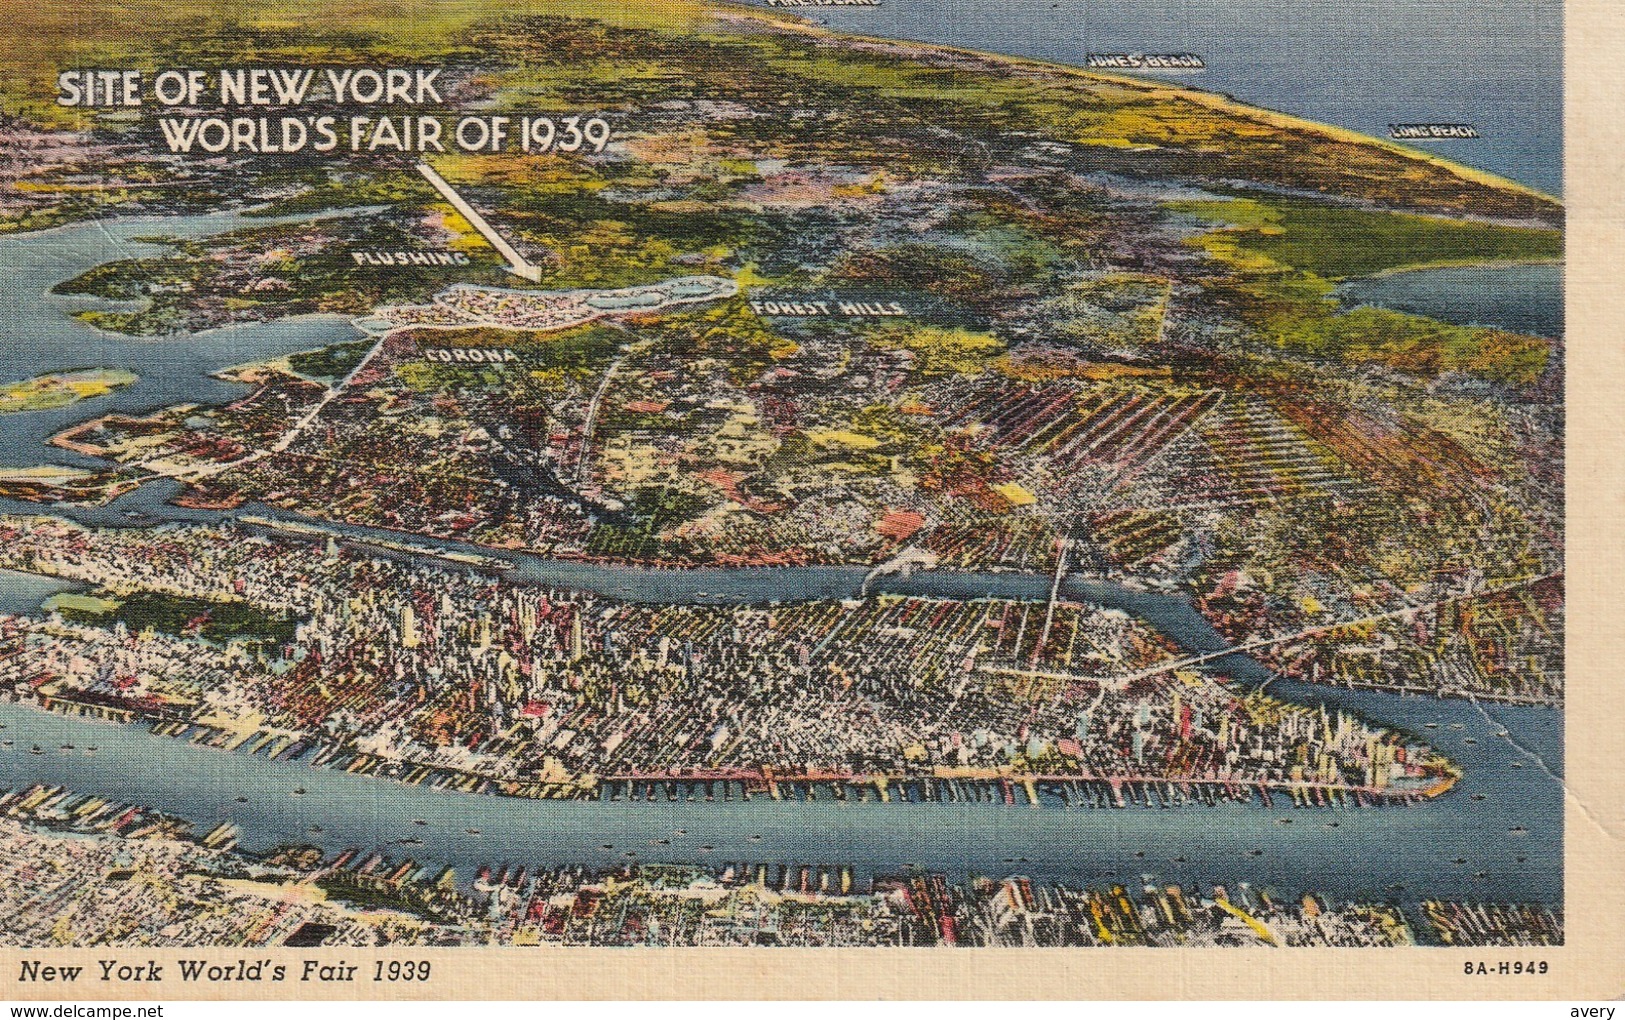 New York World's Fair, Site Of World's Fair As Seen From The Air, 1939 - Exhibitions